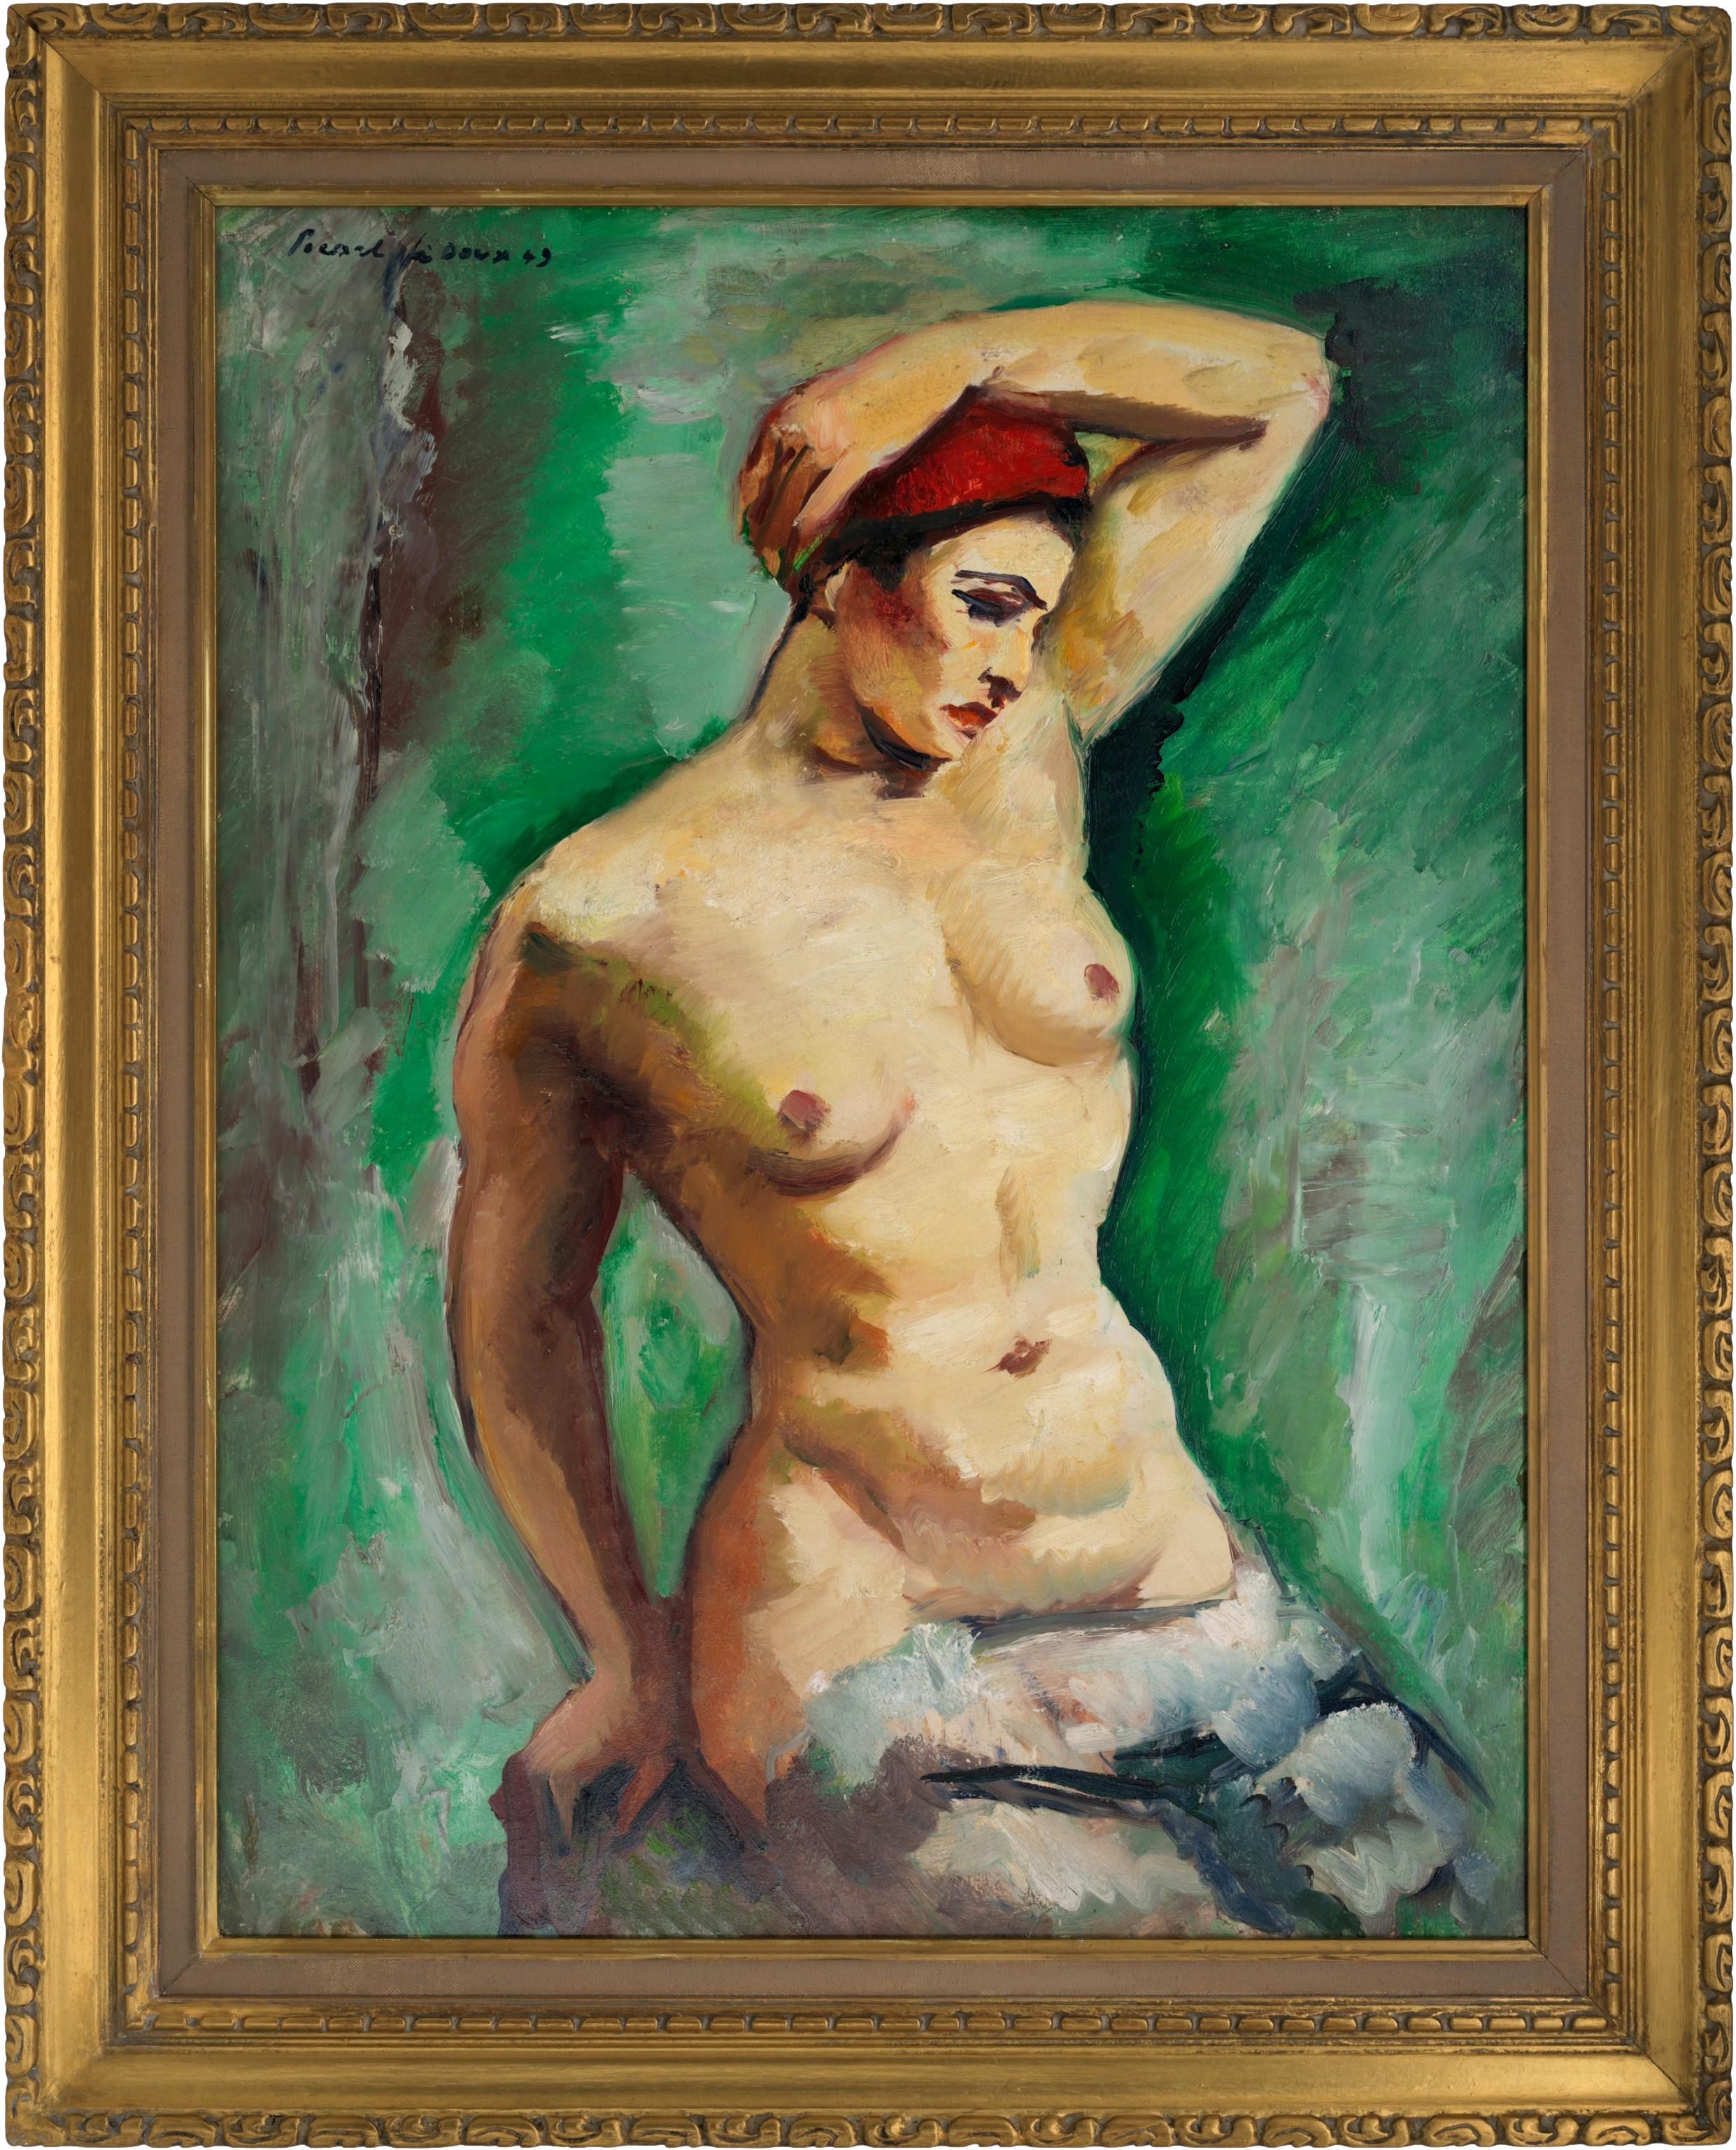 Charles Picart le Doux Portrait Painting - Charles PICART LE DOUX, Model on Green Background, Oil on Isorel, 1949